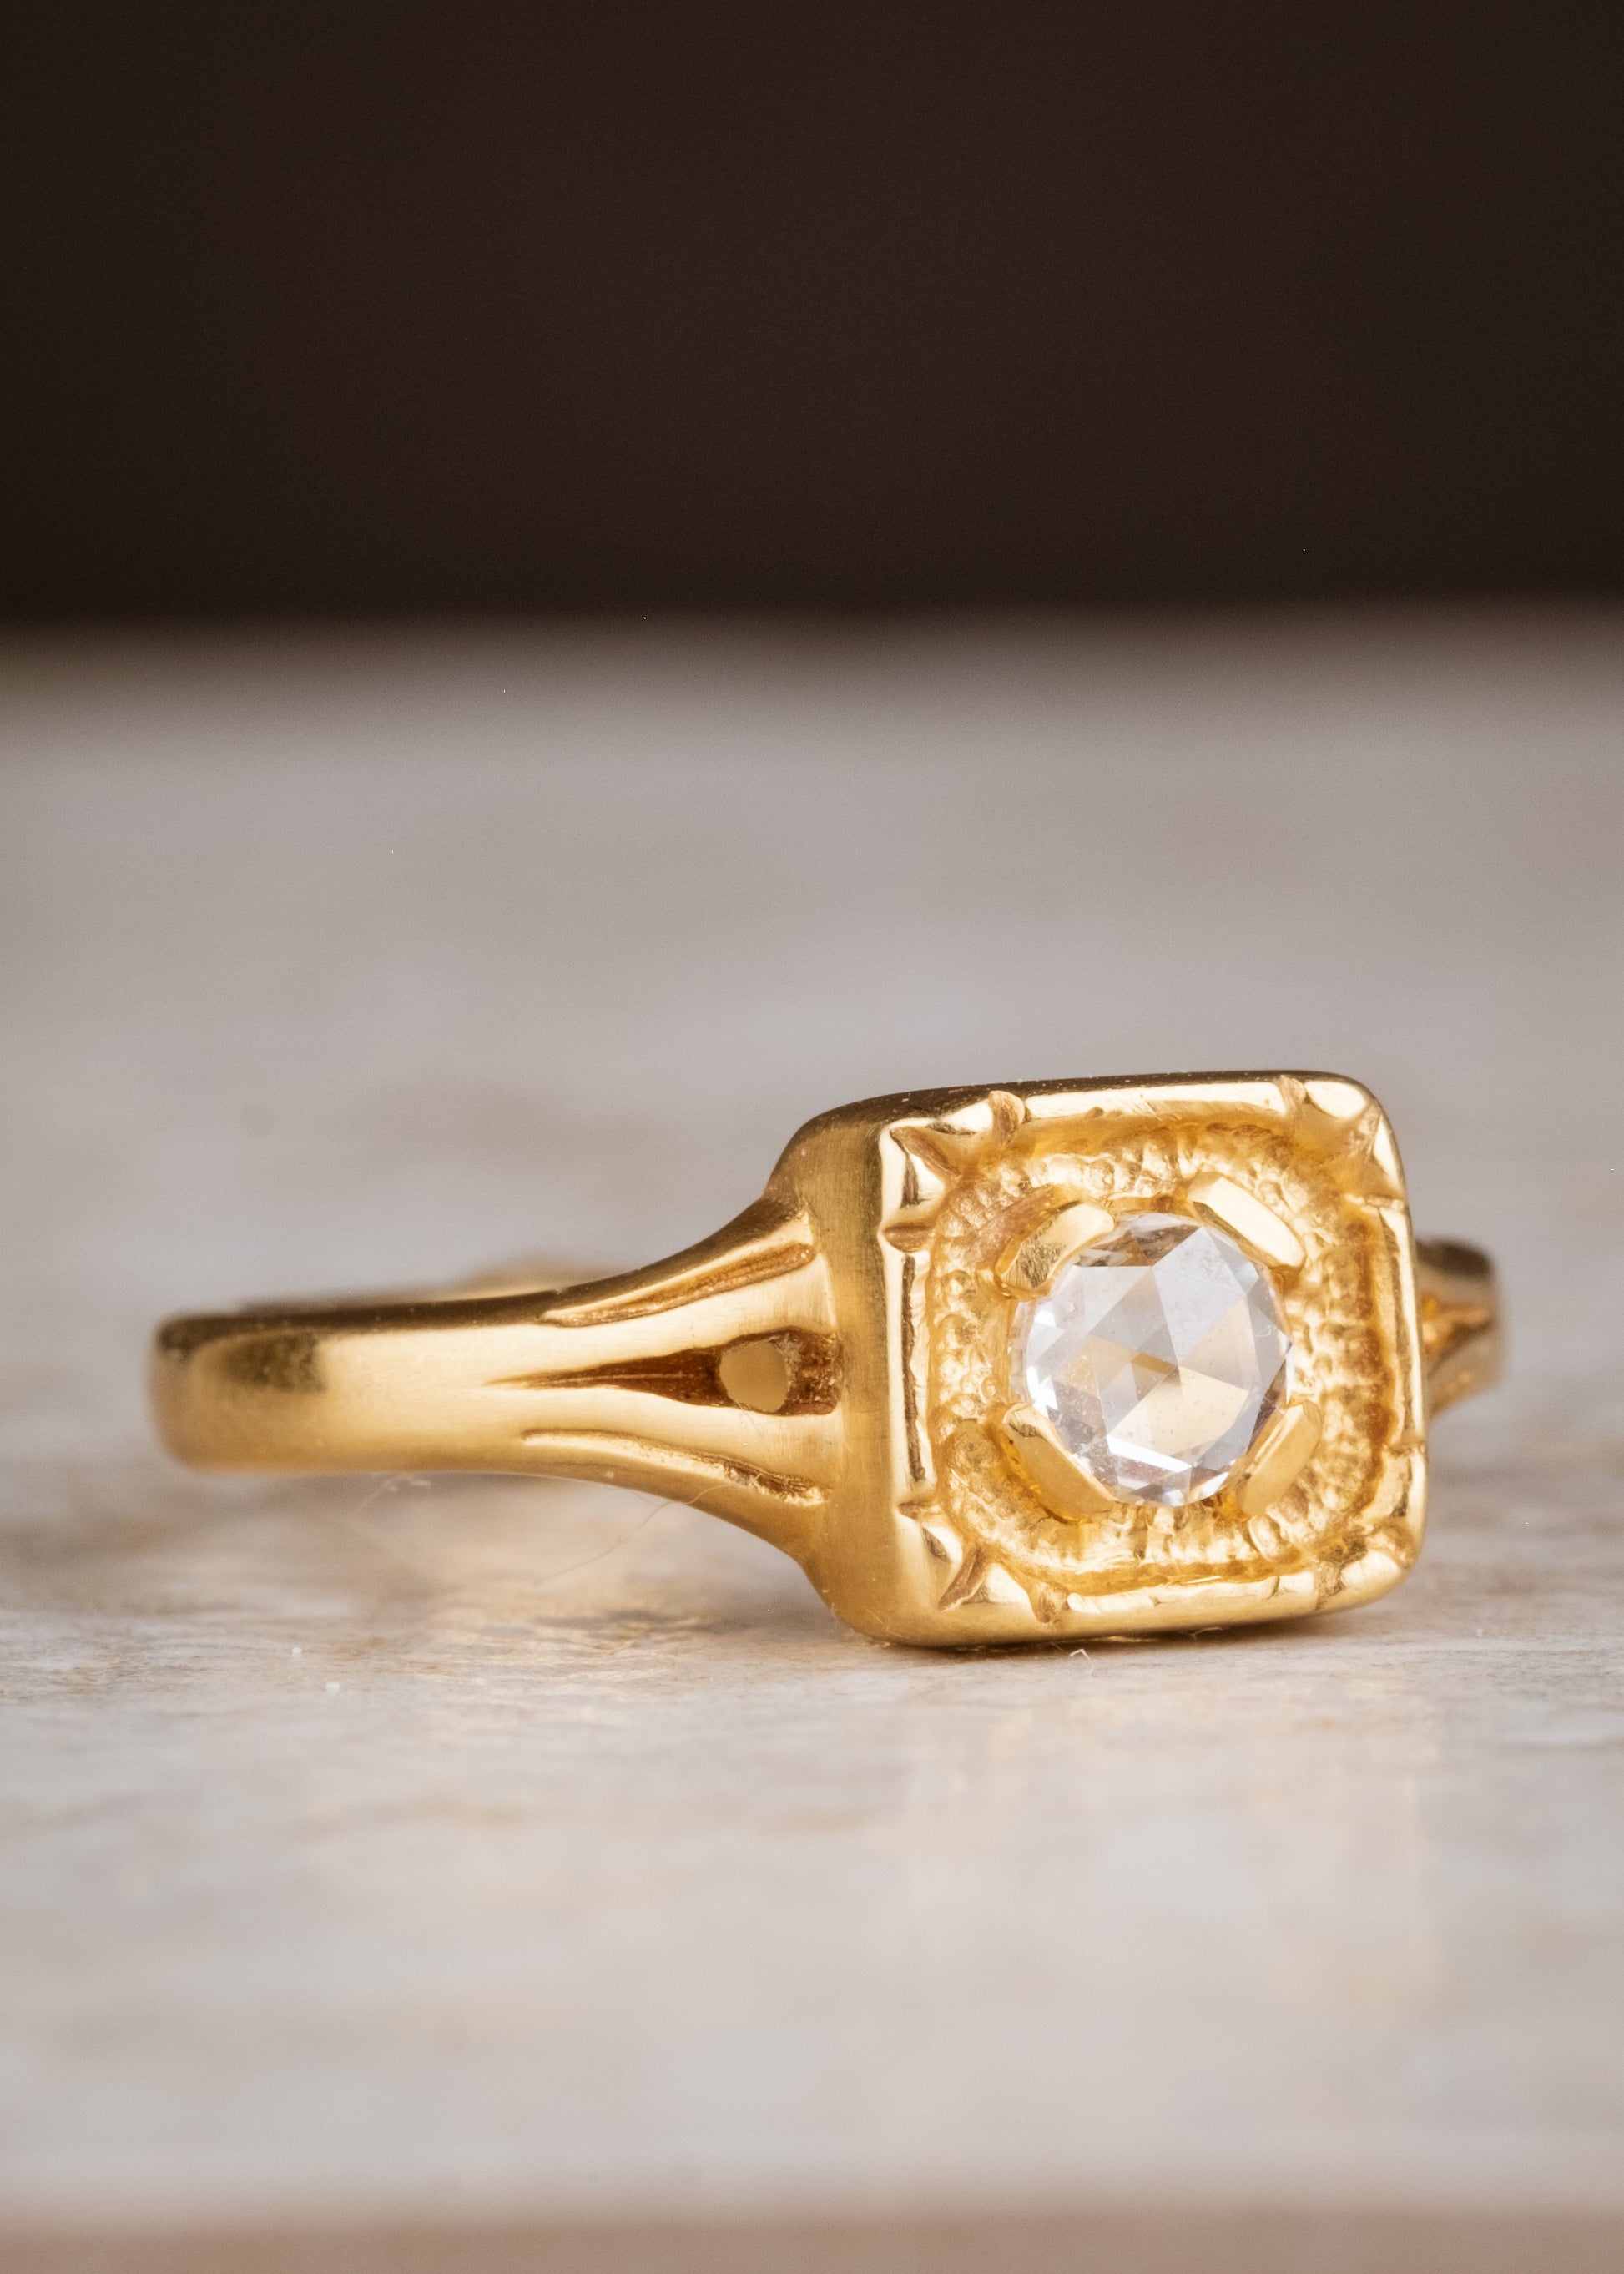 Modern lines intersect with an antique aesthetic to create the Chamber ring, a square setting of textured gold that houses a recessed rose cut diamond— strong and substantial, a meaningful connection to the past and present. 